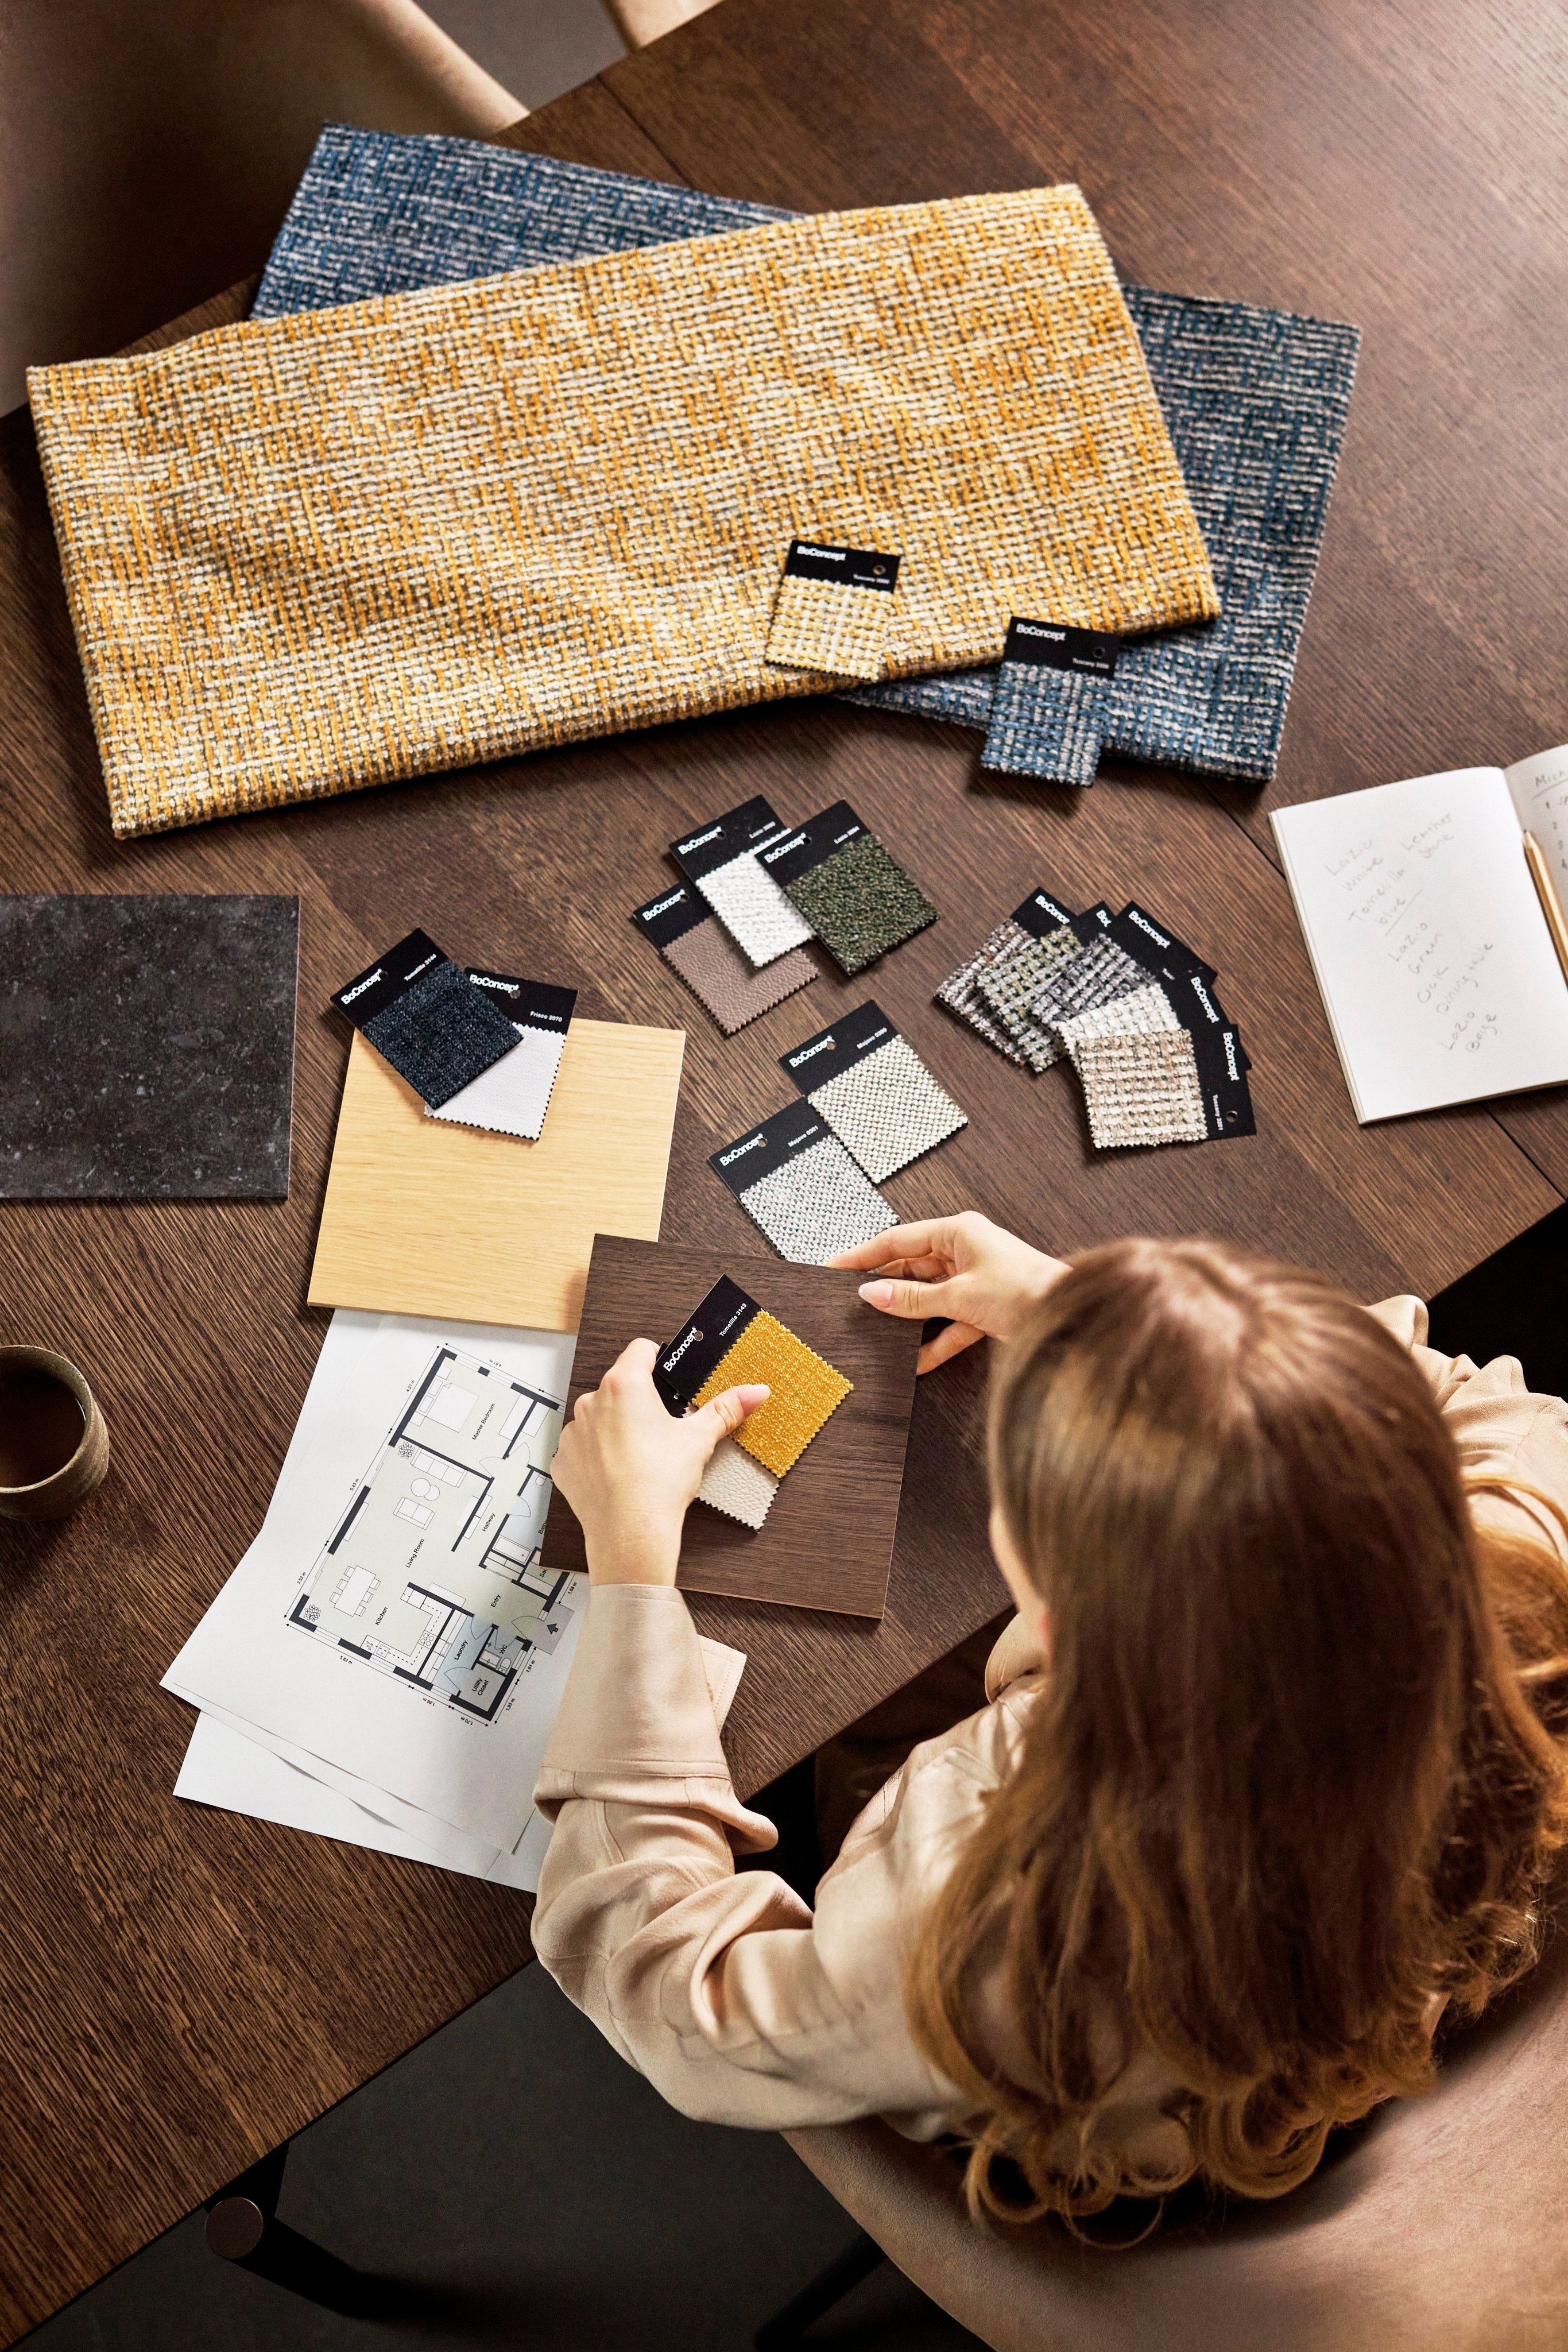 Designer choosing fabric samples on a wooden table with floor plan and notes